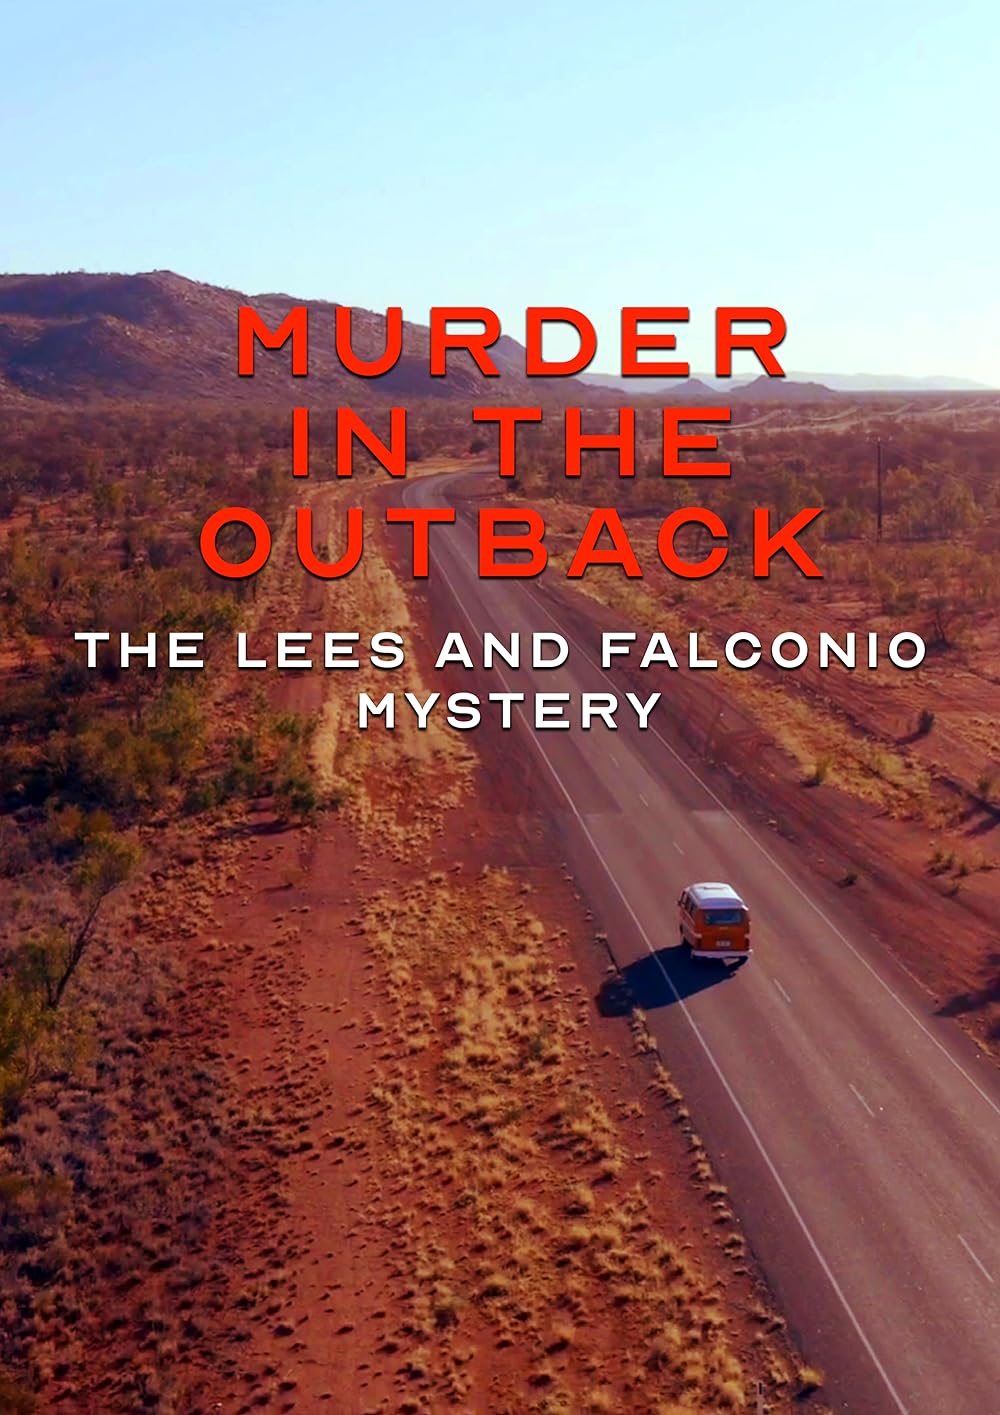 Murder in the Outback